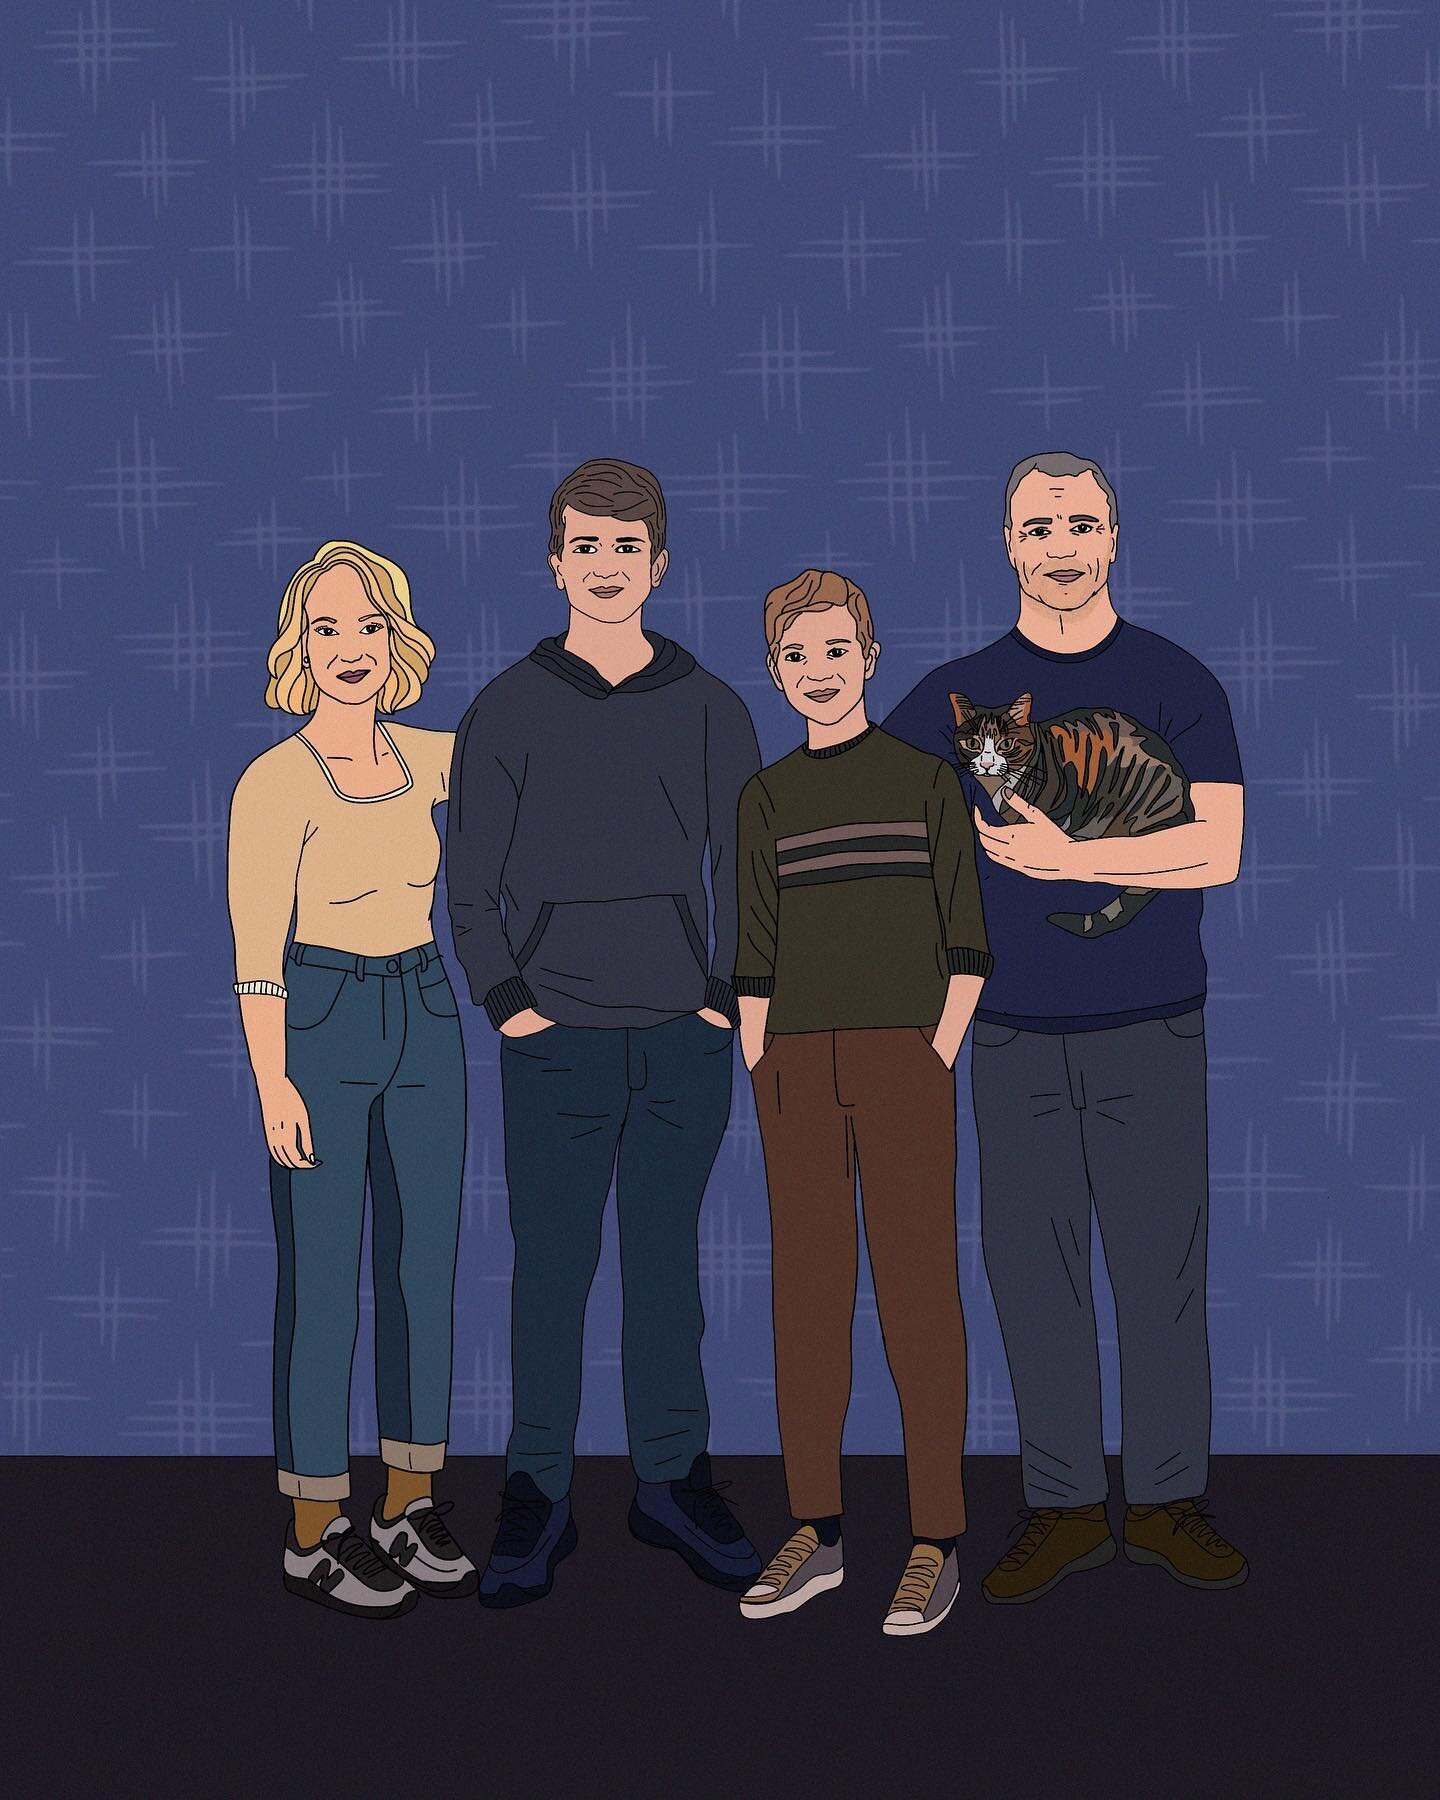 A huge big thank you to @tarleeindahouse for this wonderful family portrait commission! I love it.

Portrait and illustration commissions are open year round, so if you have a birthday coming up and don&rsquo;t know what to get hit me up for a chat, 